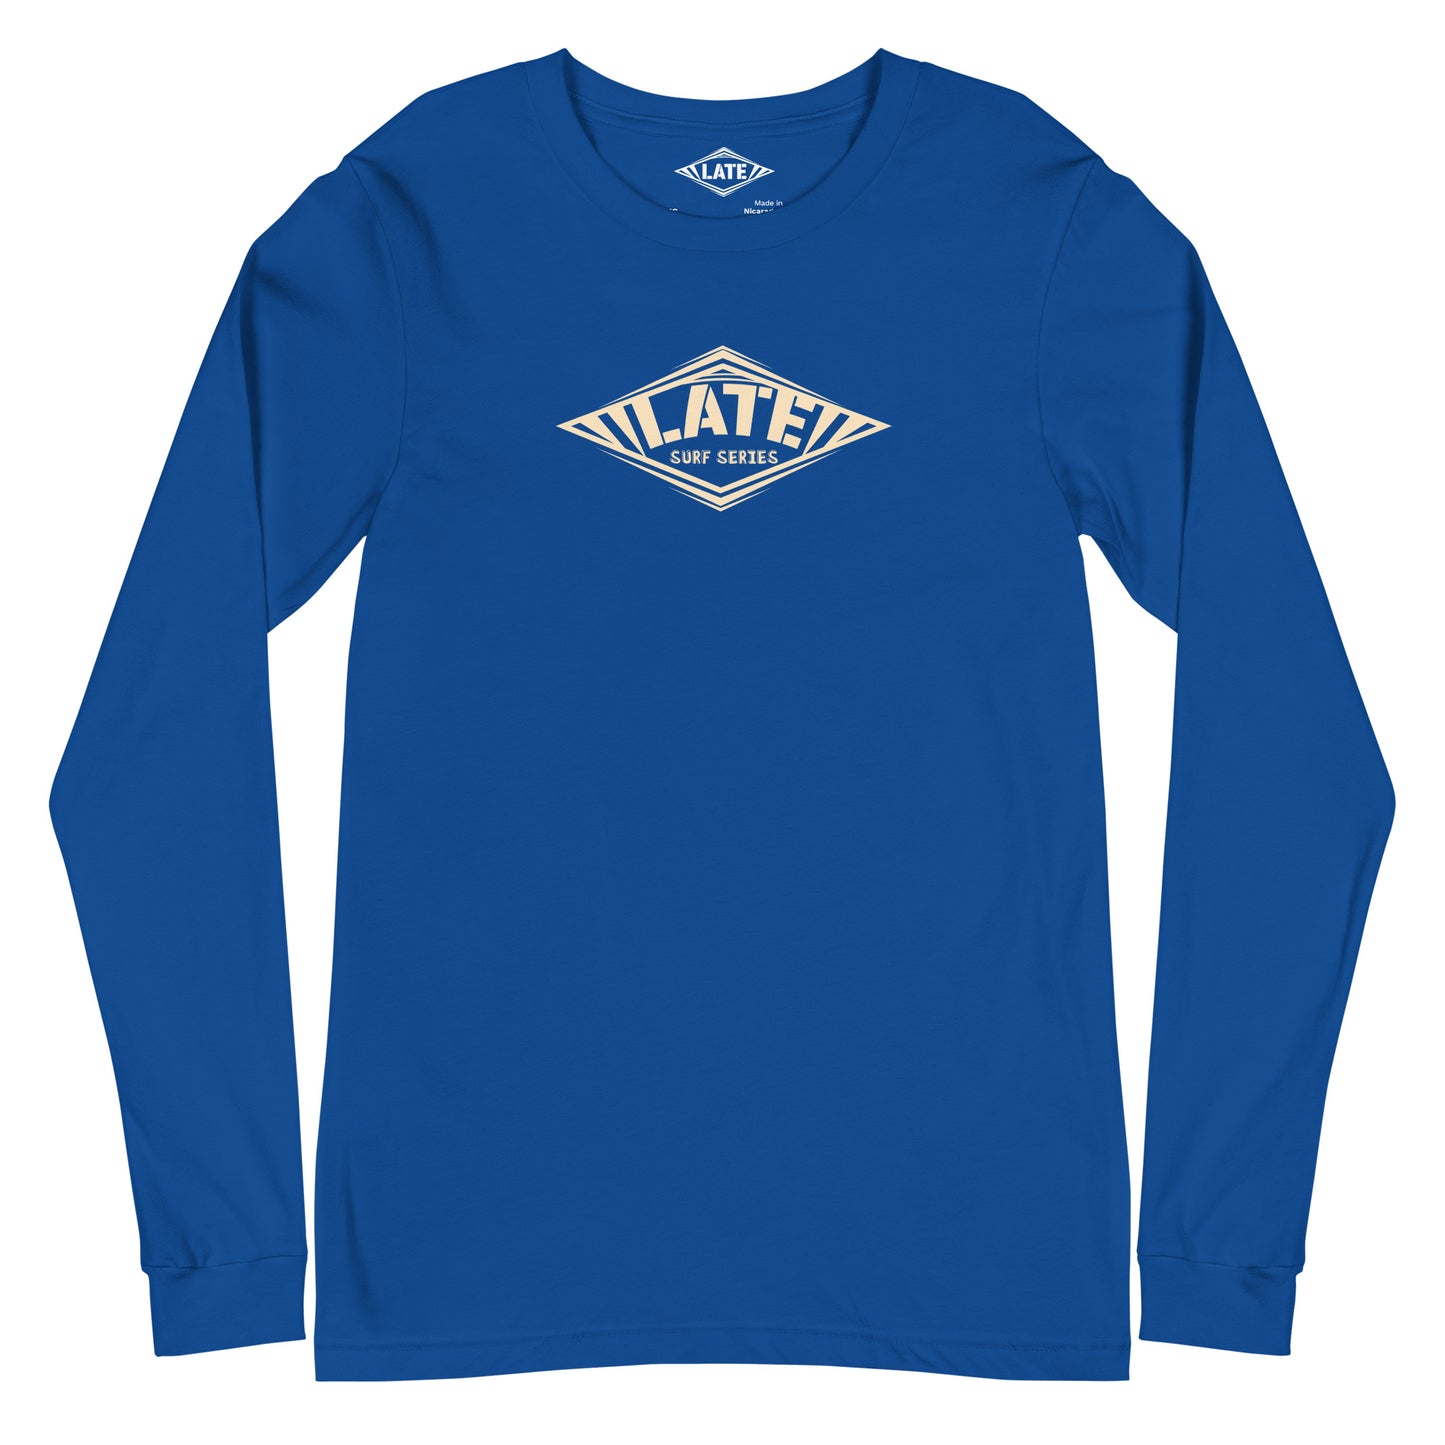 Long Sleeve Surf series Take On The Elements logo Late, unisex, face, couleur bleu royal